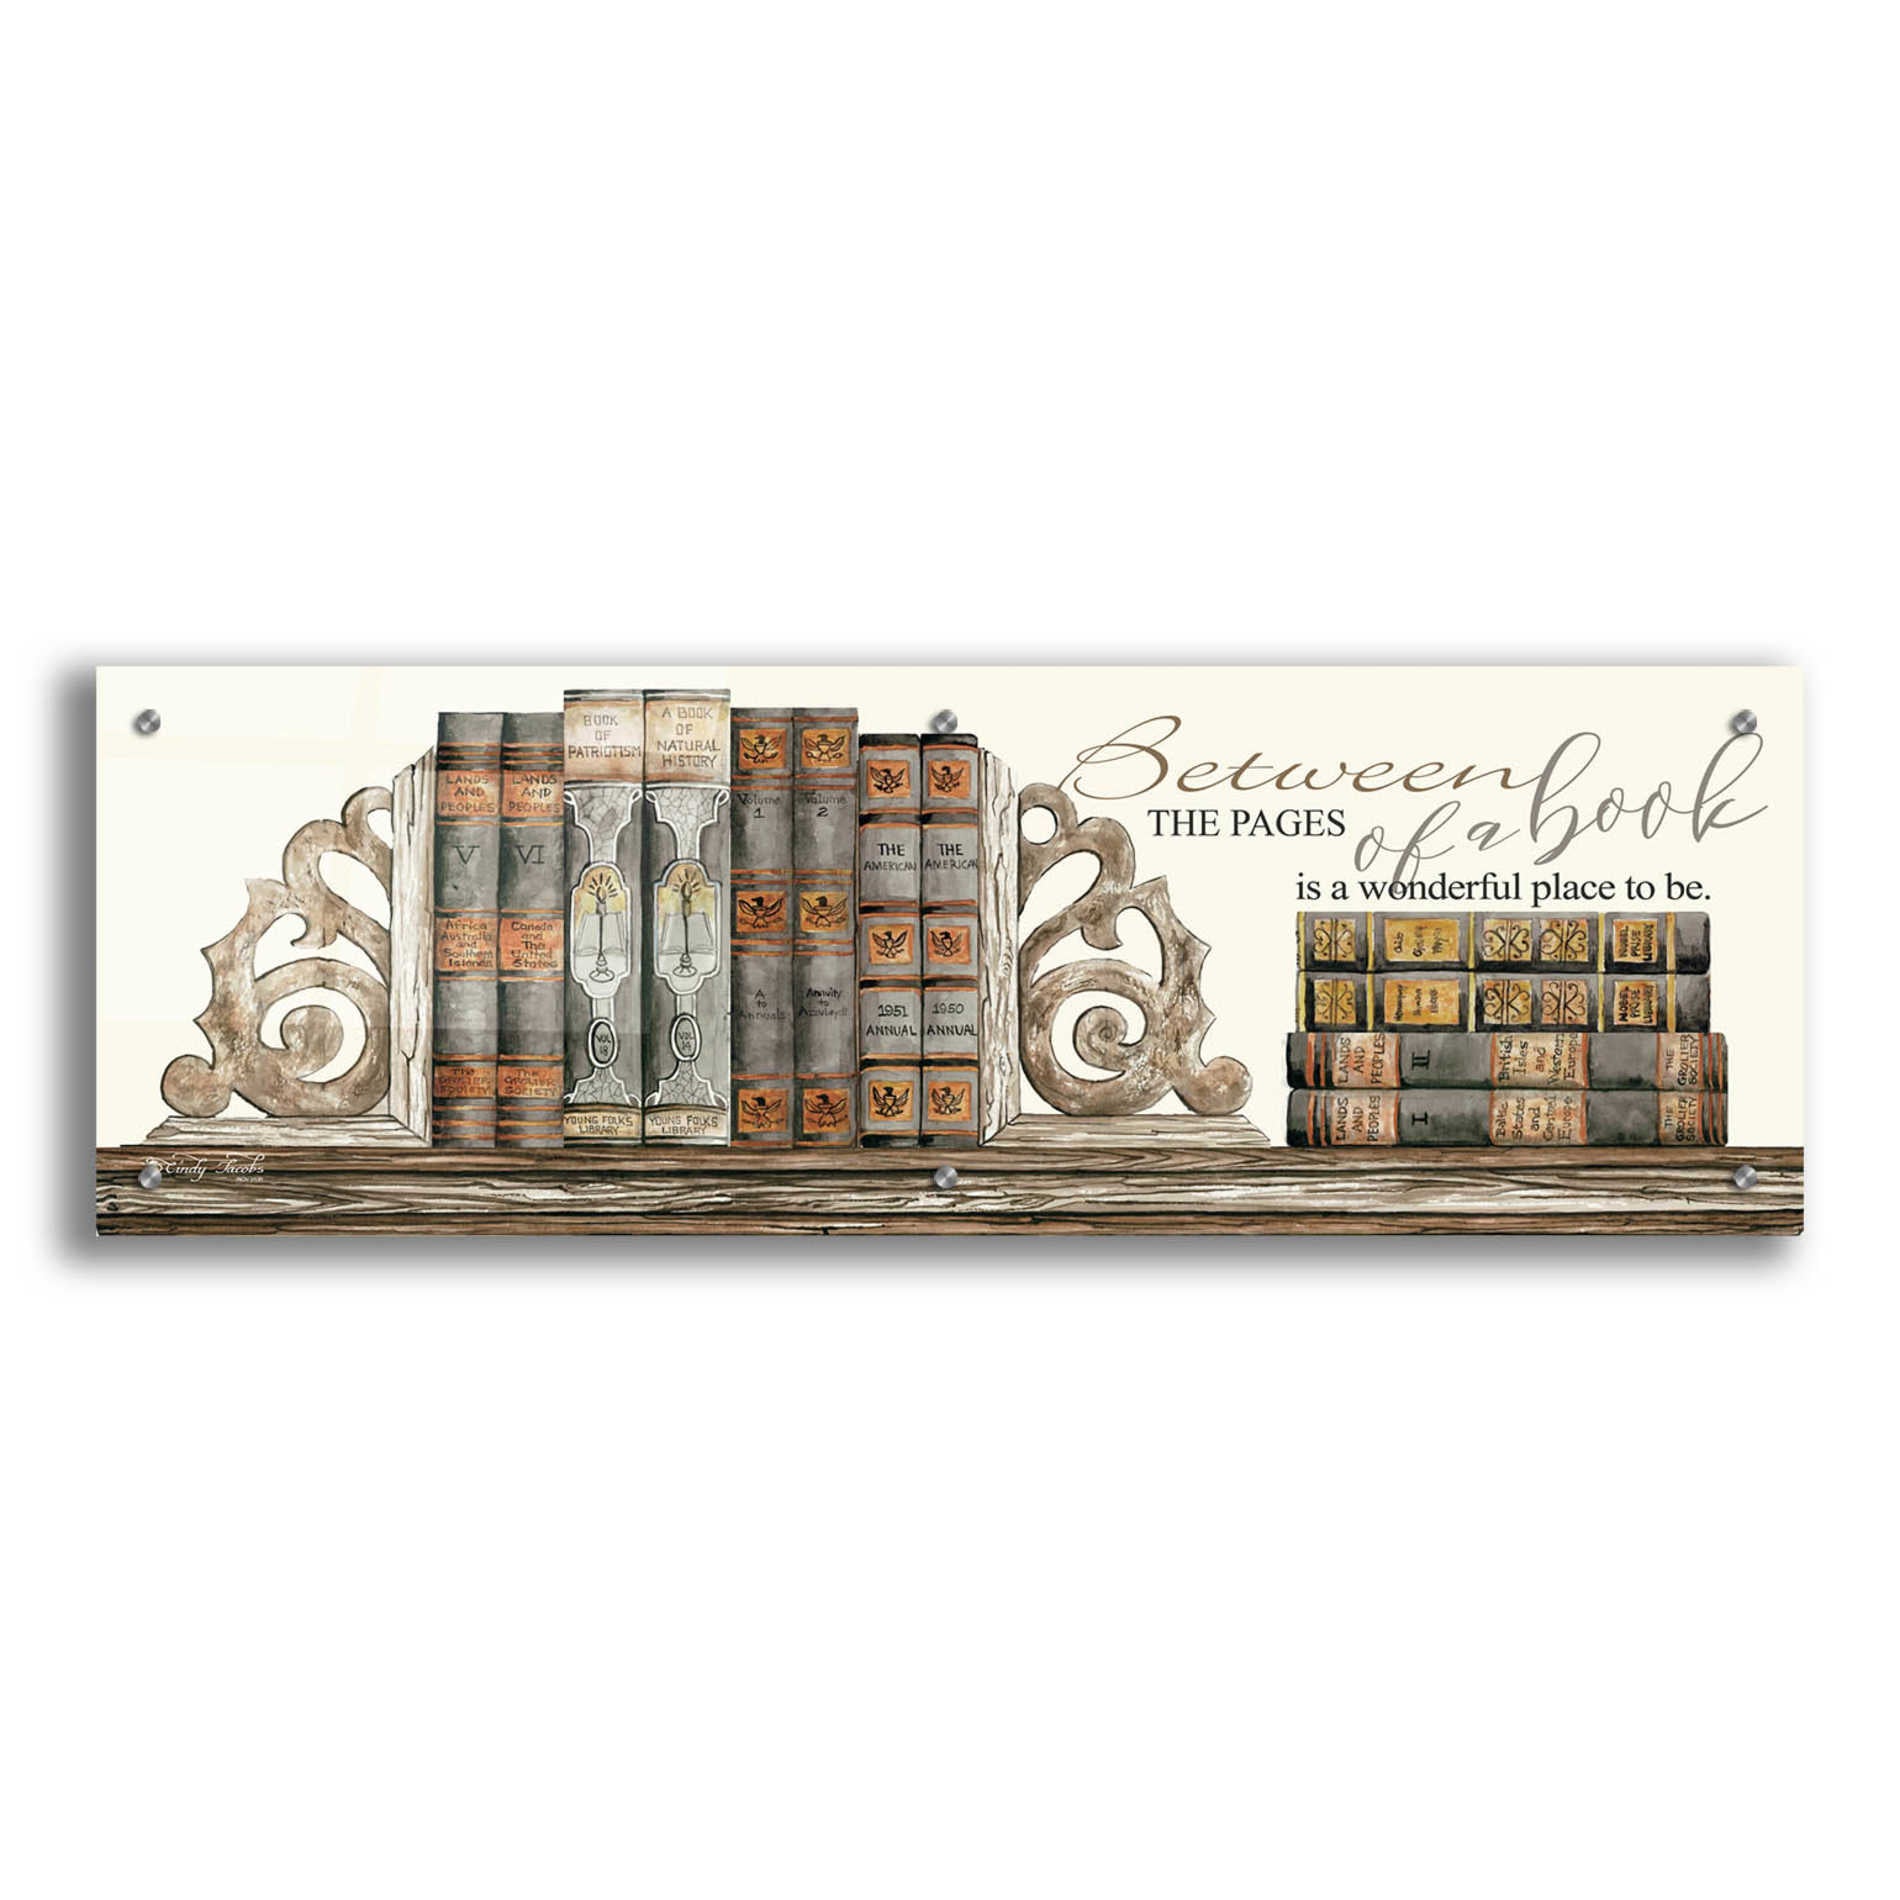 Epic Art 'Between the Pages of a Book' by Cindy Jacobs, Acrylic Glass Wall Art,36x12